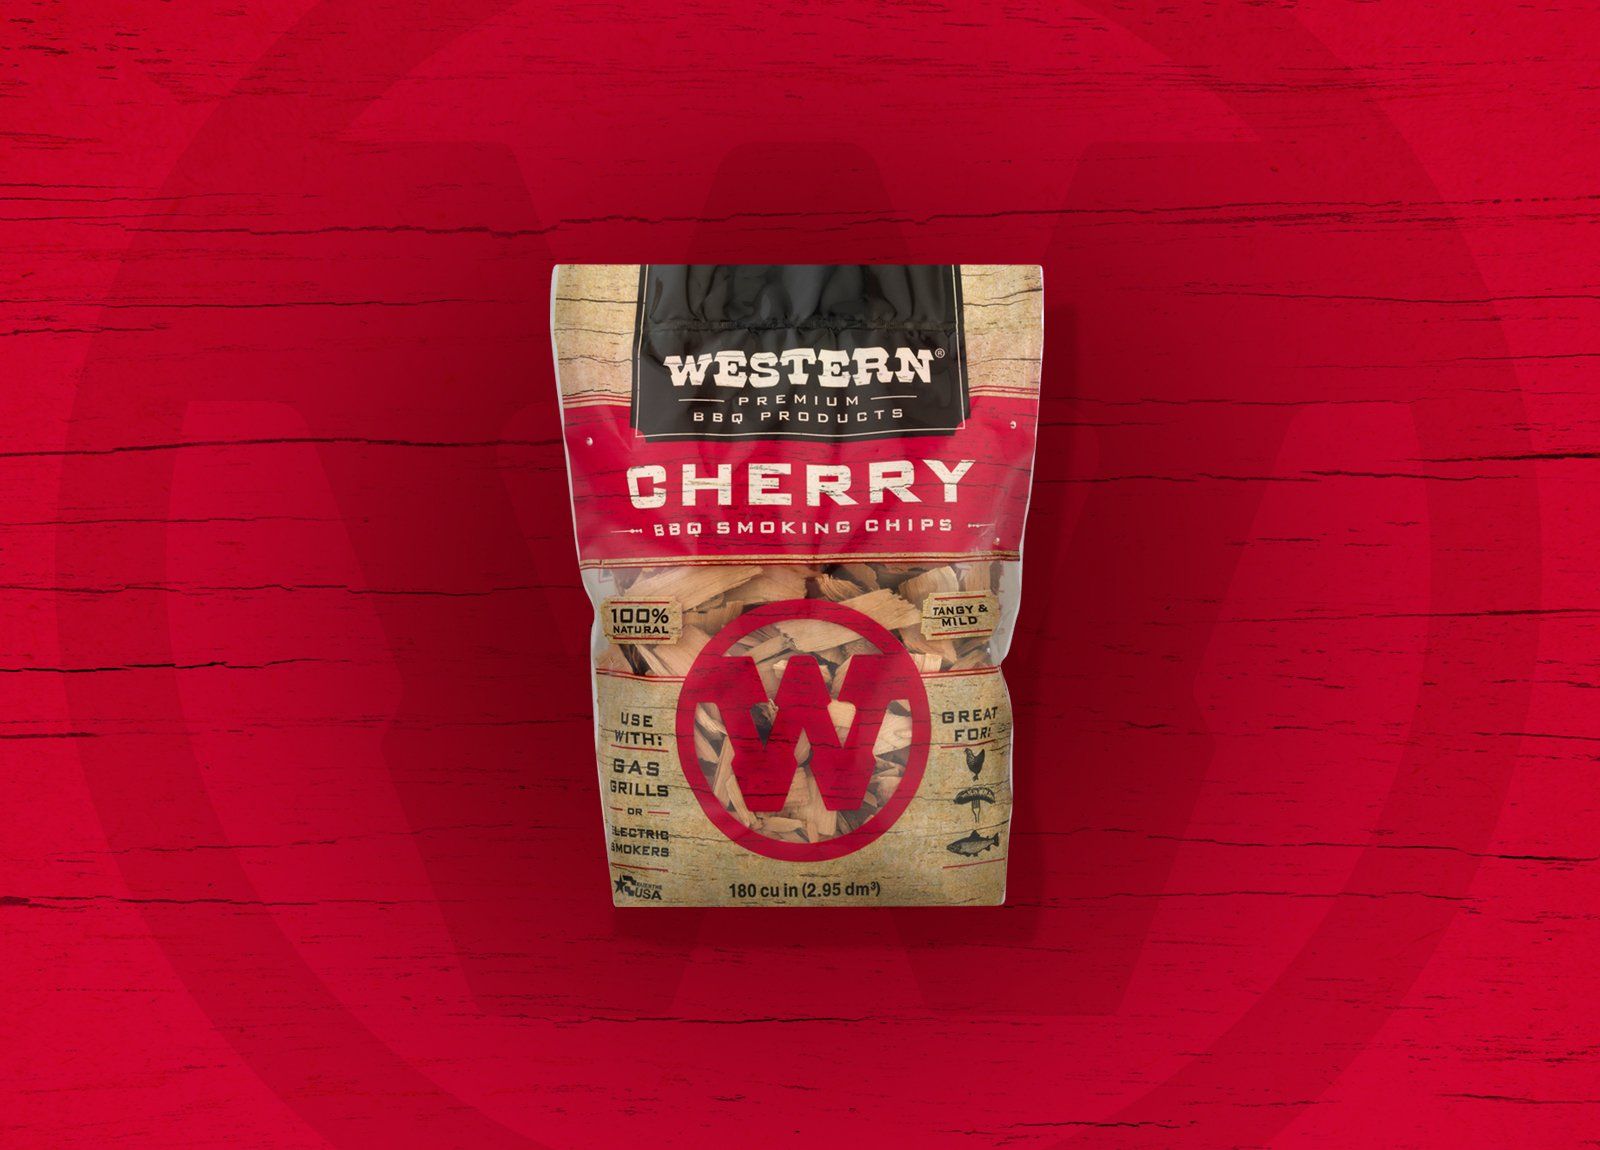 Bag of Western Cherry Smoking Chips on an red background